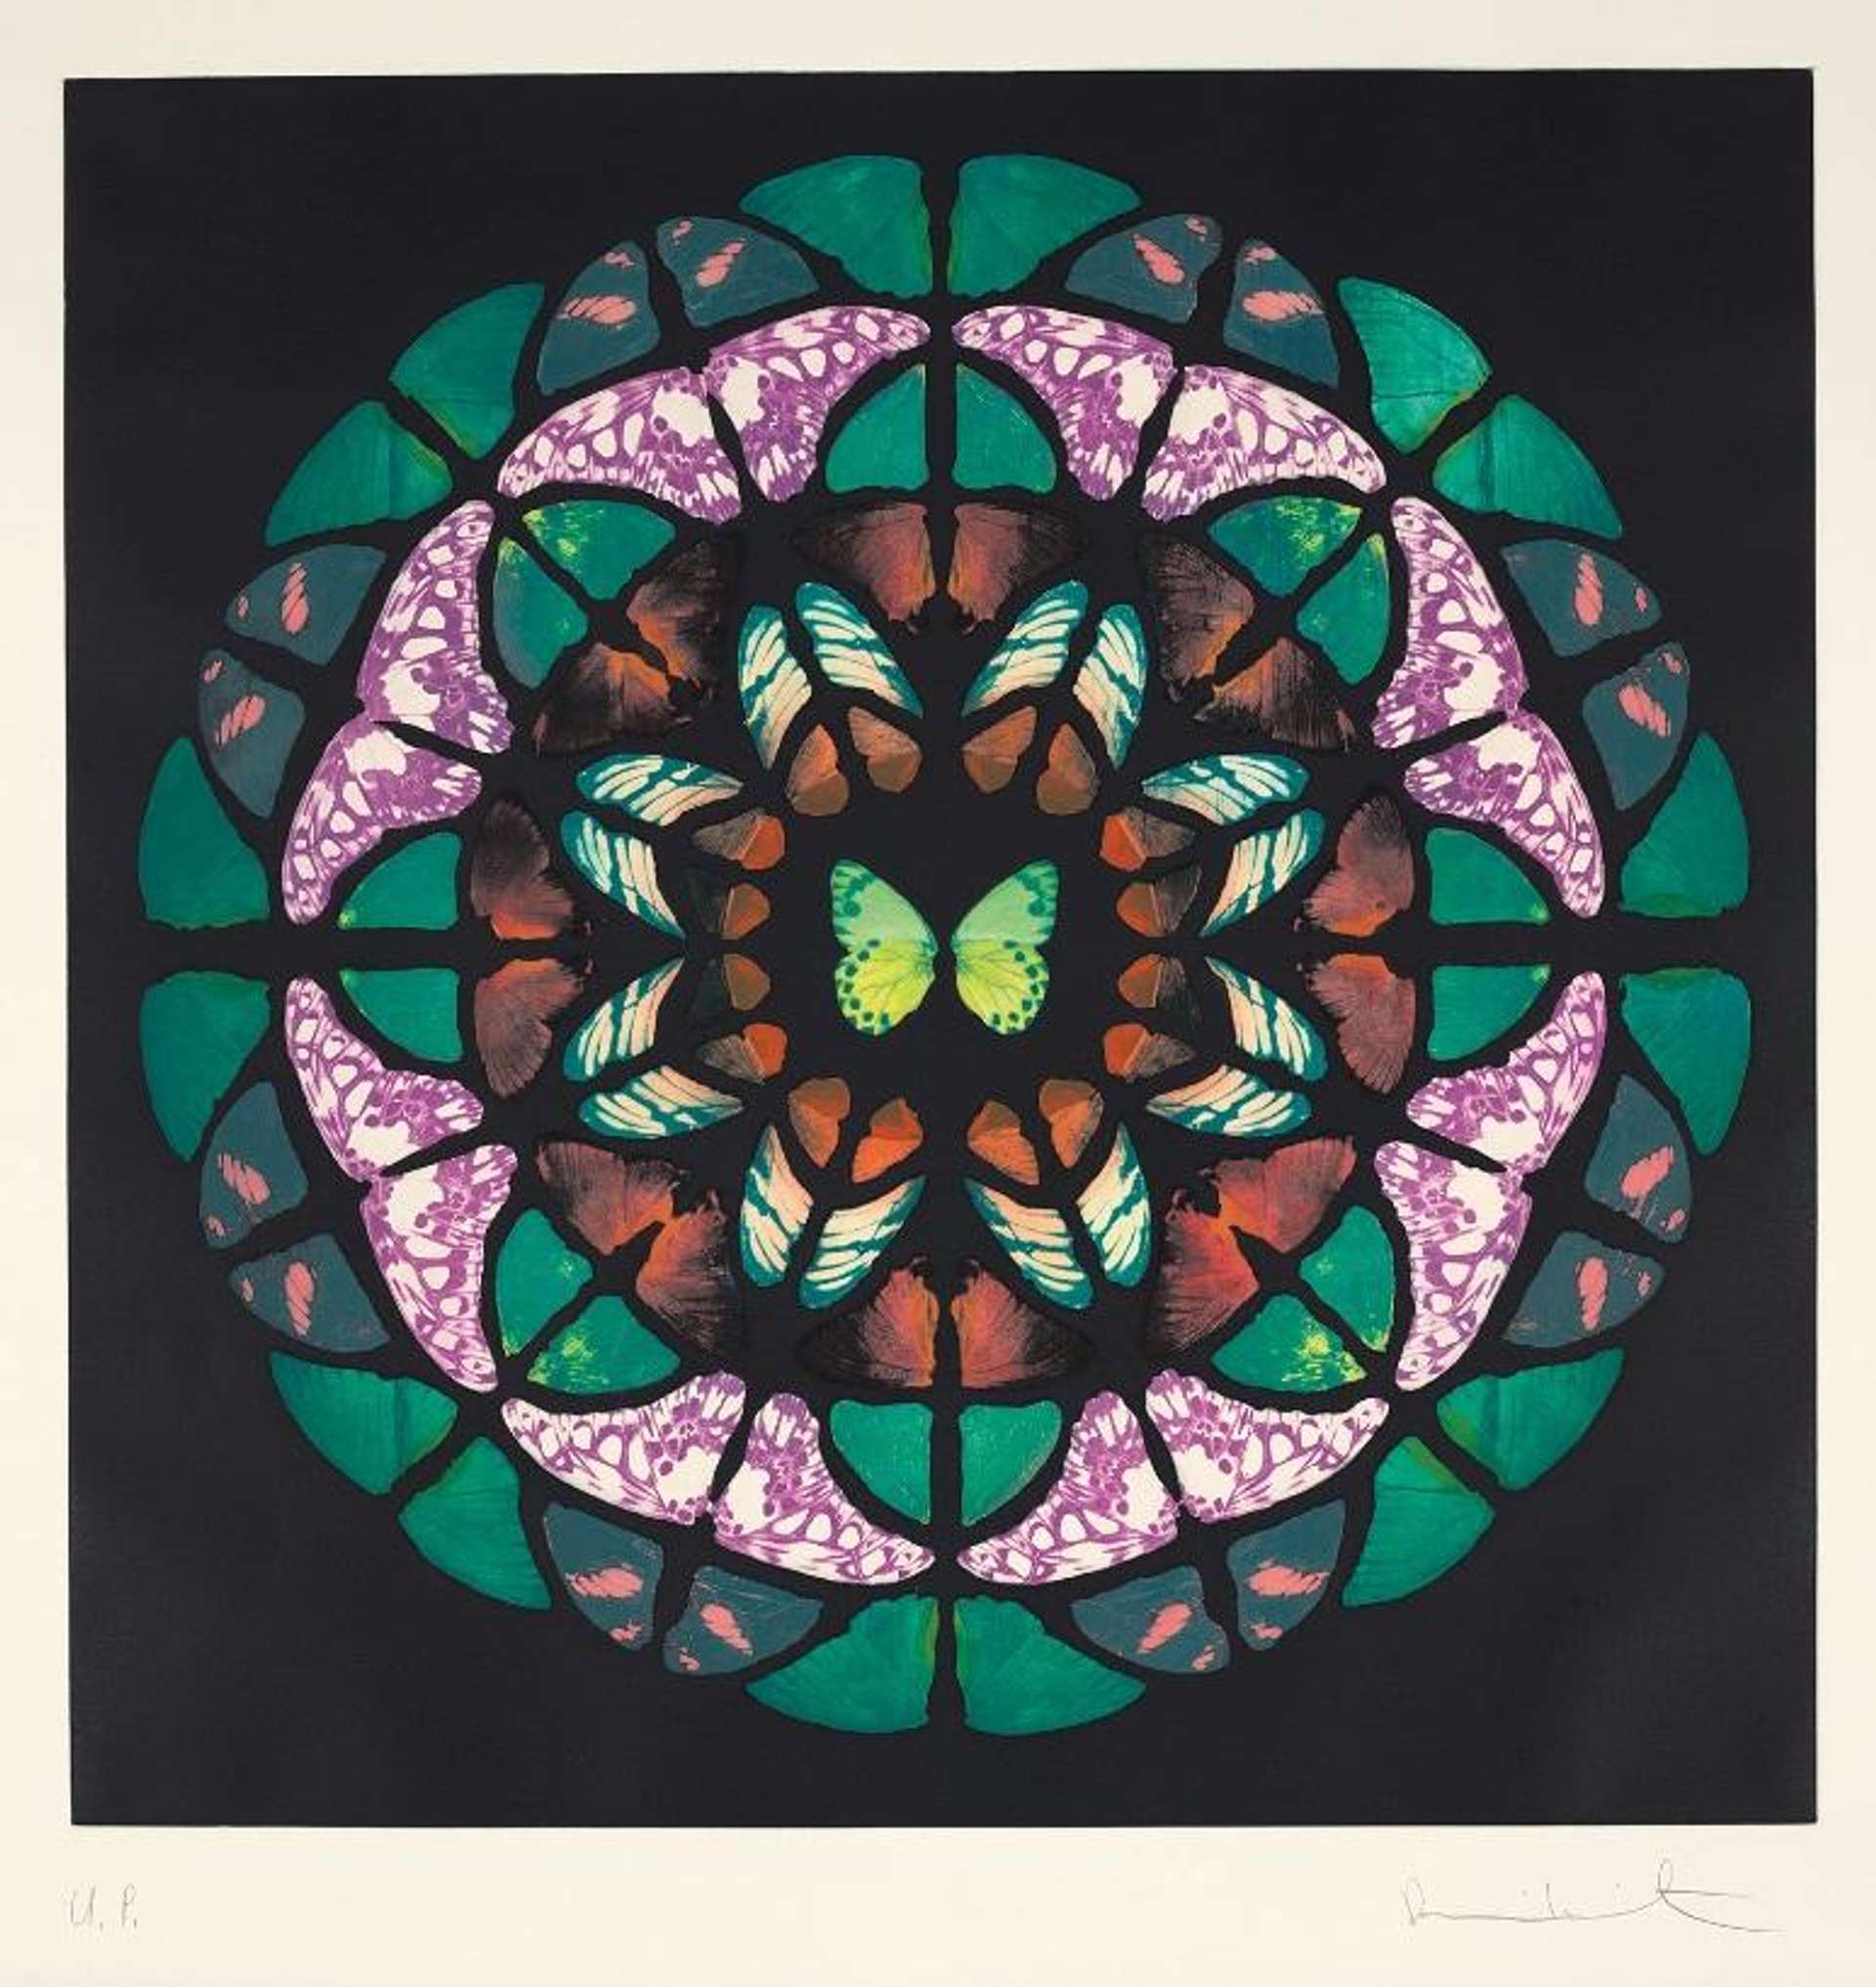 An etching by Damien Hirst depicting an arrangement of butterfly wings to look like stained glass, arranged in concentric circles.